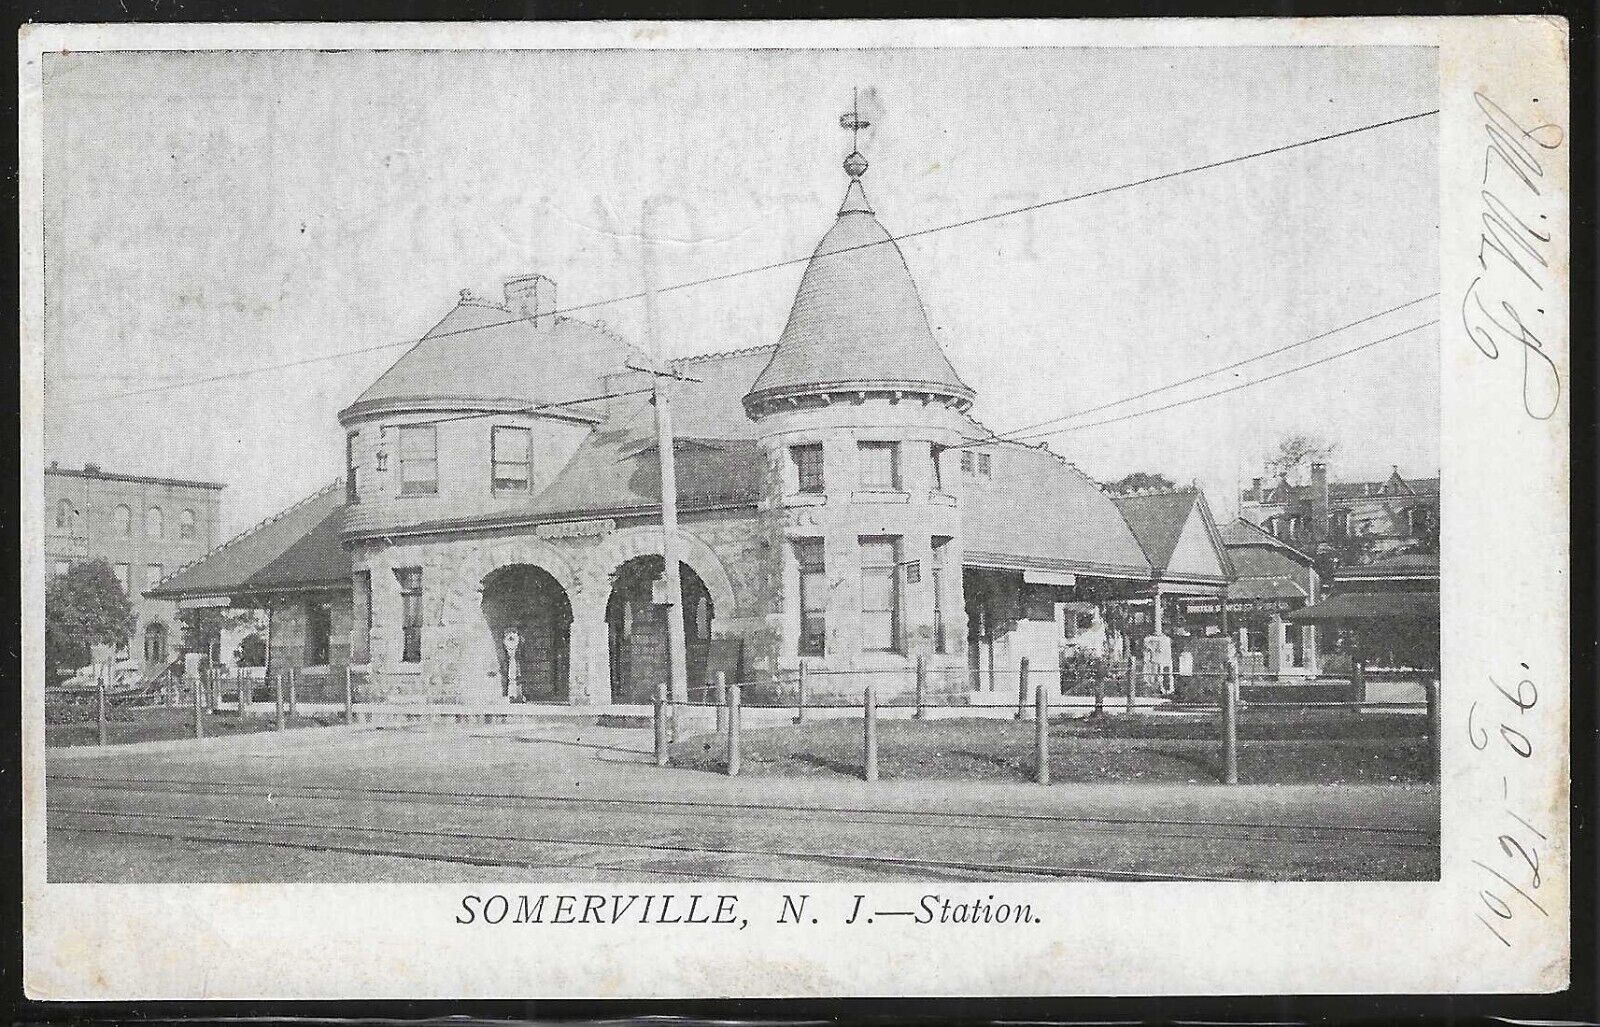 Somerville, New Jersey Train Station, Very Early Postcard, Used in 1906